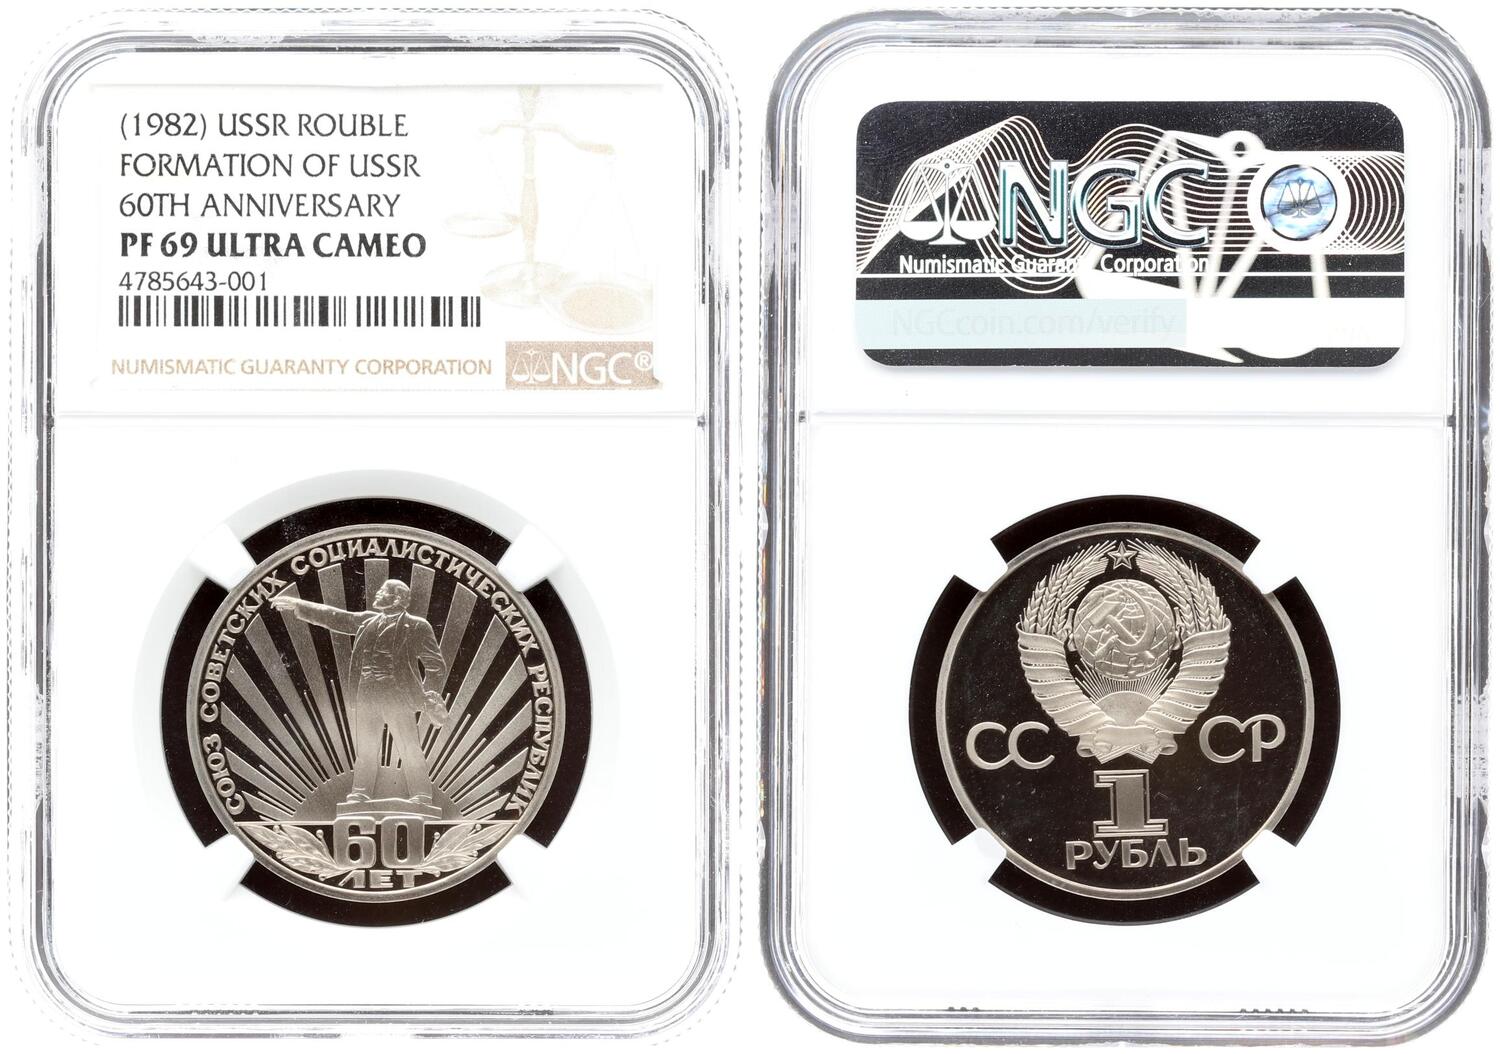 NumisBids: Numisbalt Auction 7 (17-19 Sep 2020): Day 3: Russian 